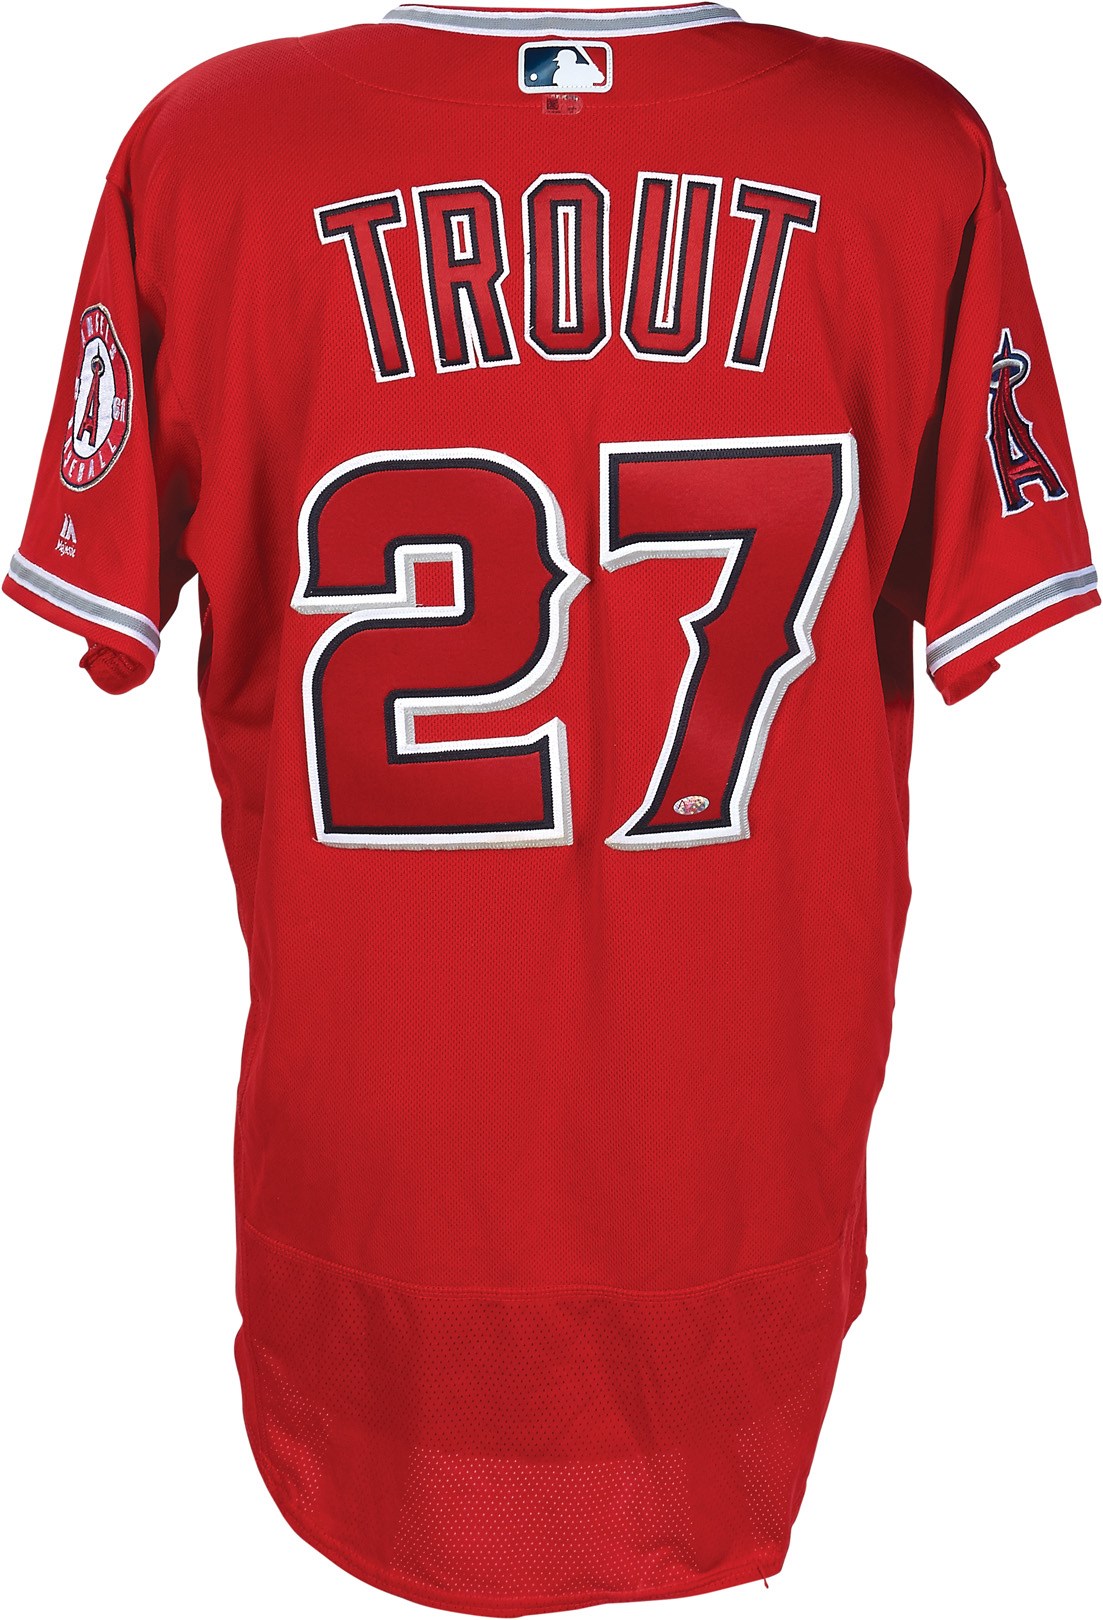 Baseball Equipment - 2017 Mike Trout Game Worn 20th Home Run Jersey (MLB Auth. & Photo-Matched to 3 Games)